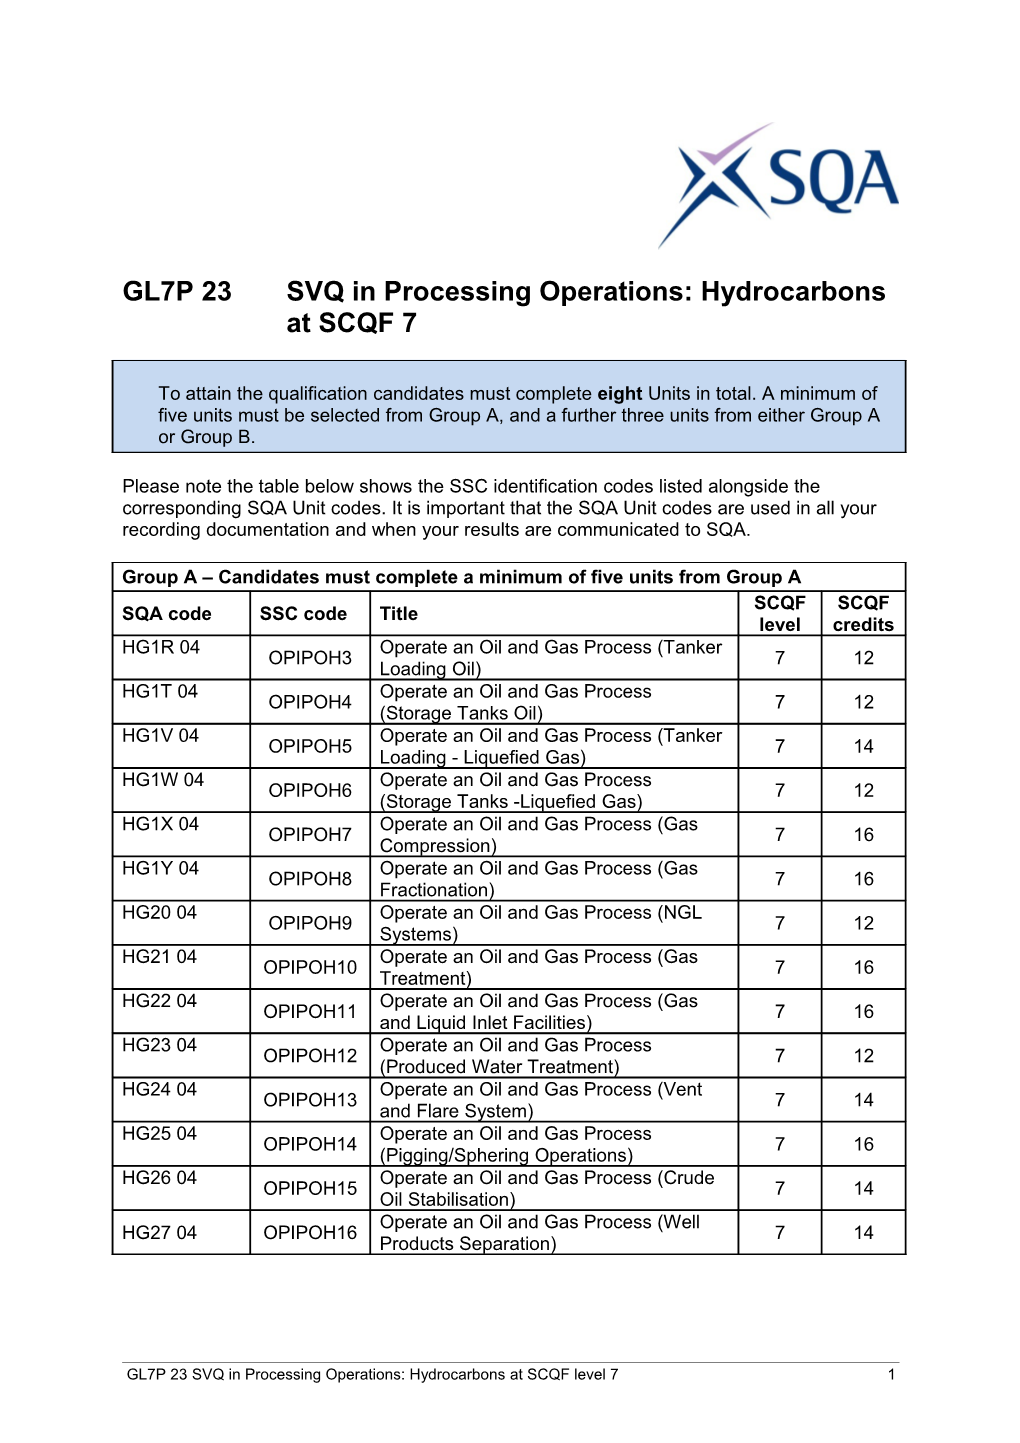 GL7P 23 SVQ in Processing Operations: Hydrocarbons at SCQF Level 71